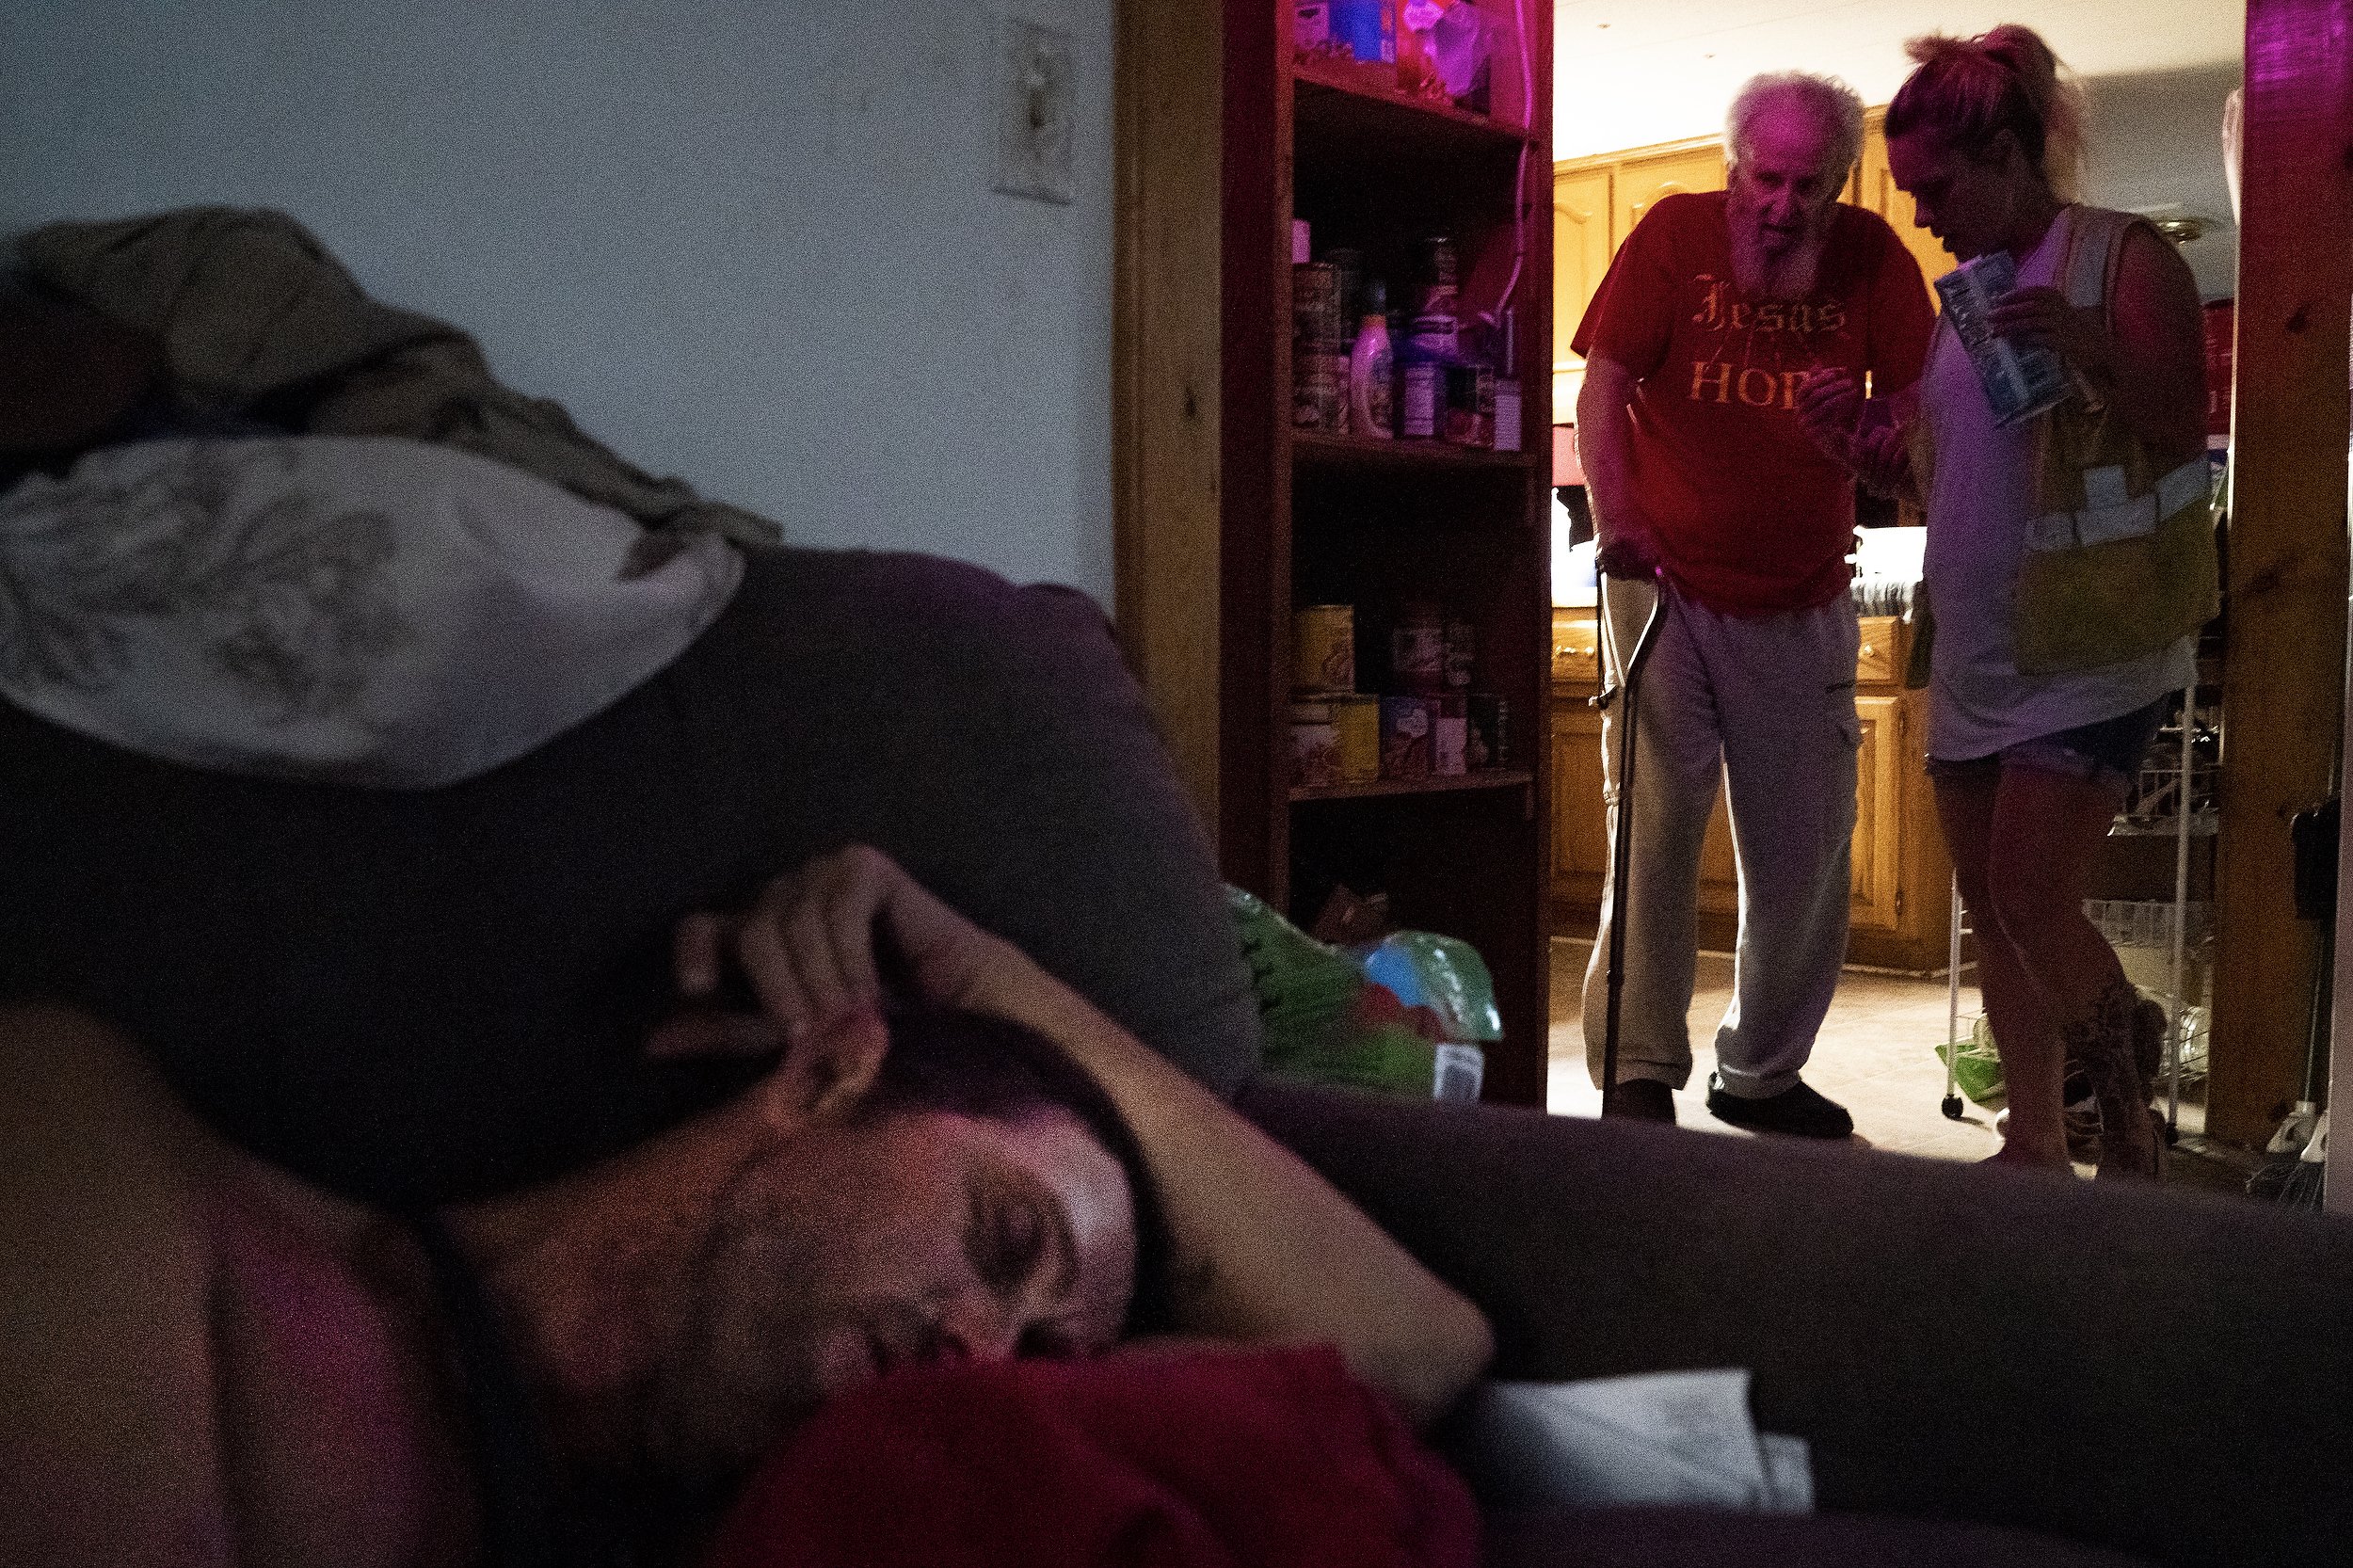  Elizabeth Singleton, right, assists her grandfather Daryel Miller, 80, after Daryel Franklin Miller, 50, at left, passed out on the couch following a long day of drinking on Wednesday, September 21, 2022, in Excelsior Springs, Mo. "What's sad is tha